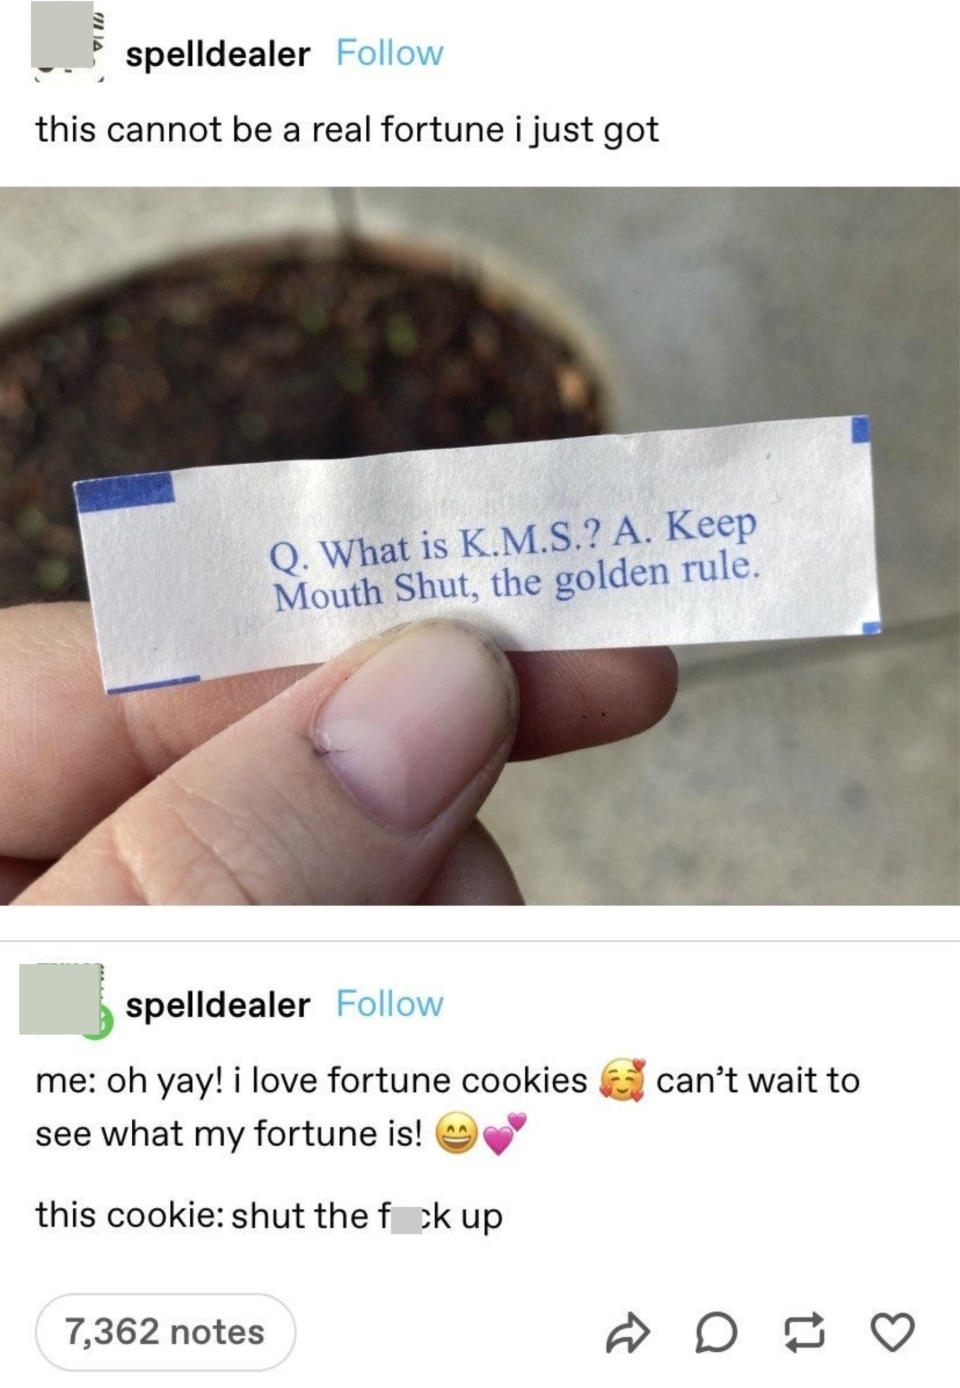 Person can't believe they got a fortune cookie that says "KMS means Keep Mouth Shut, the golden rule" and they describe it as "Oh yay, I love fortune cookies, can't wait to see what my fortune is" and "This cookie: Shut the fuck up"